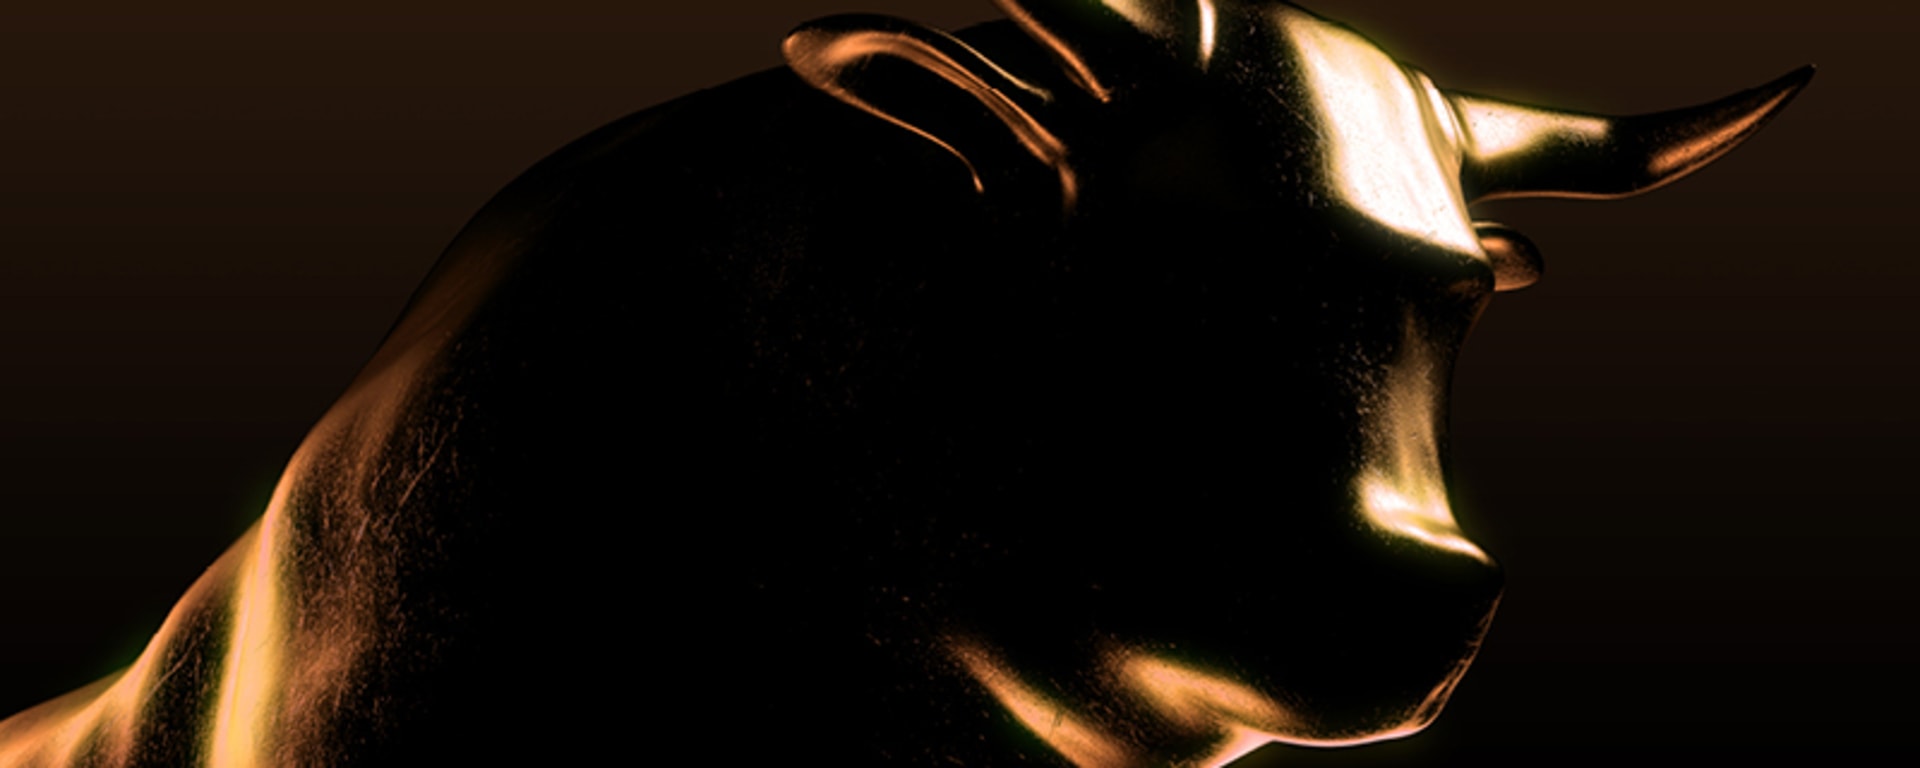 bulls-on-a-copper-high-why-commodity-prices-are-rising_article-teaser_800x450px_en